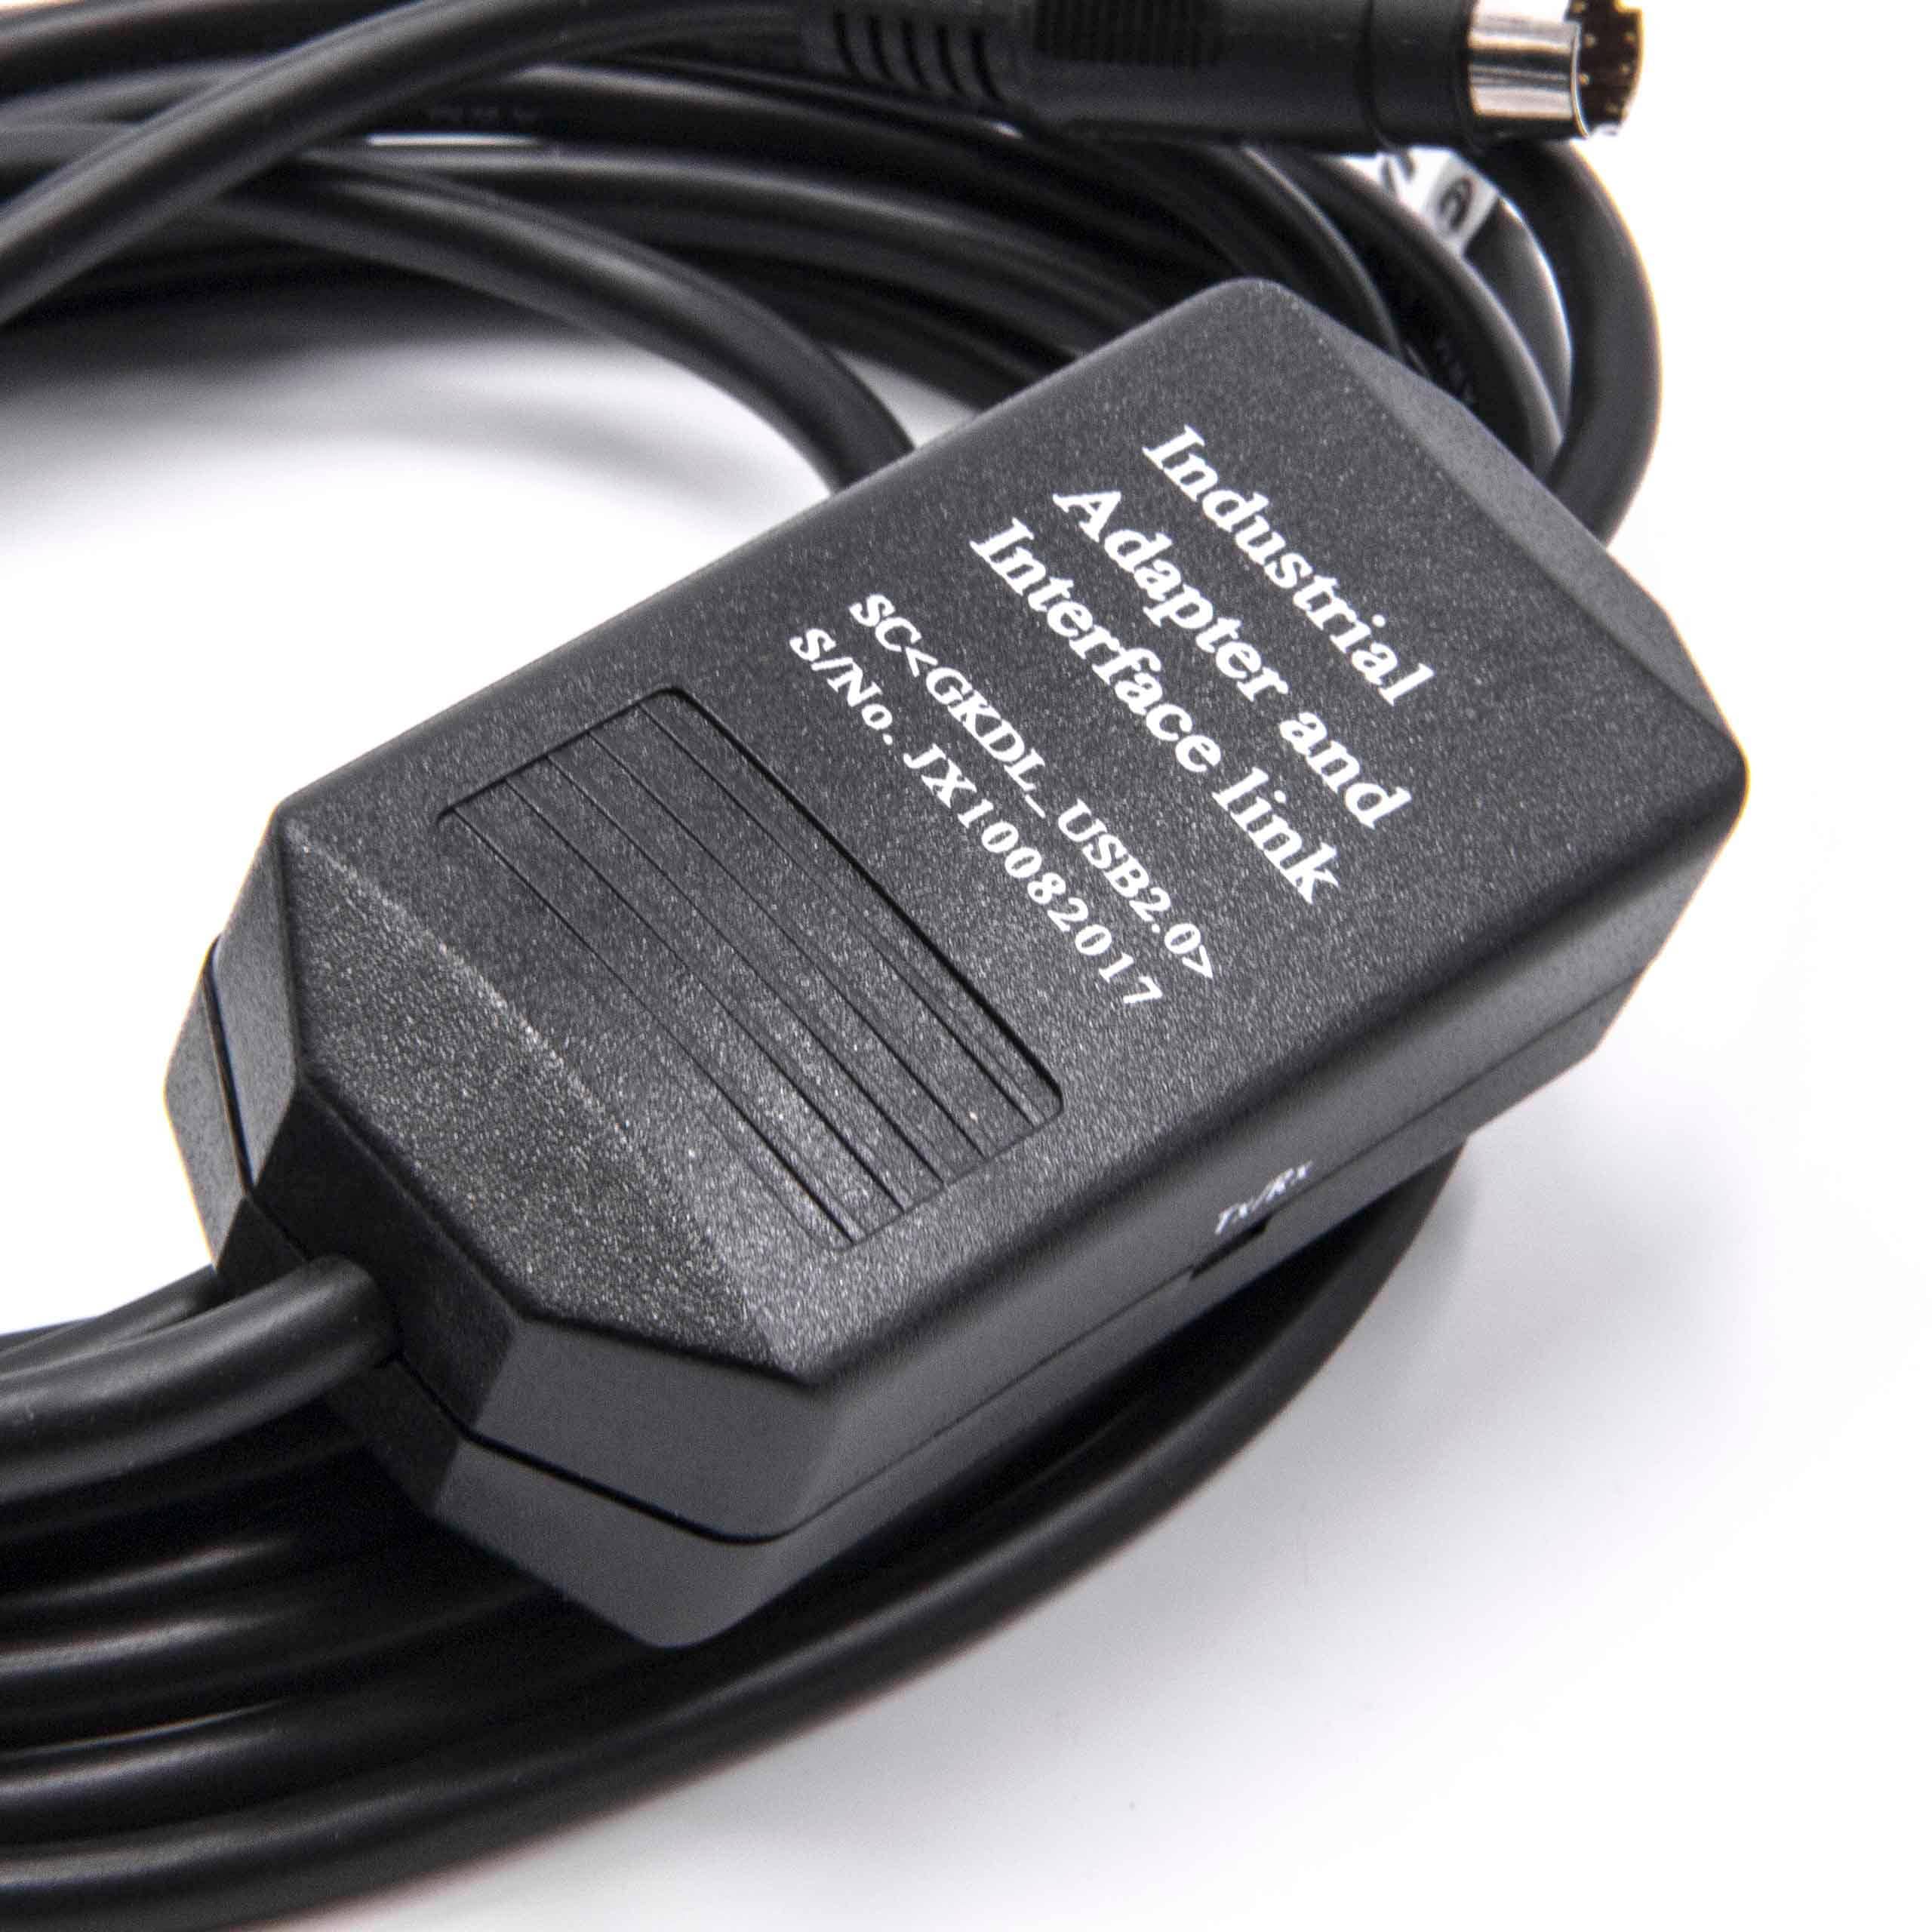 Programming Cable replaces USB-1761-CBL-PM02 forRadio